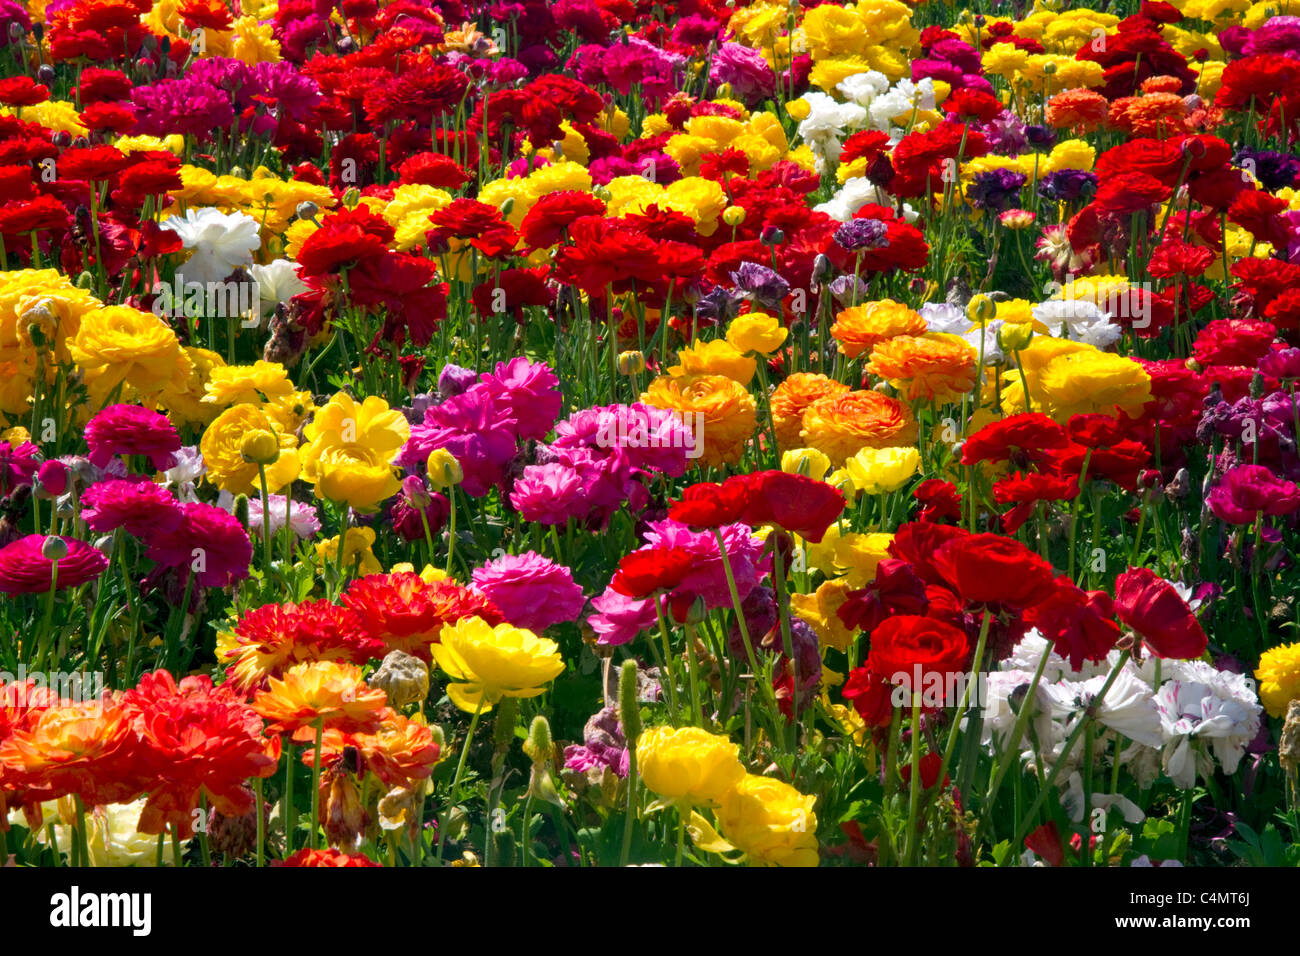 The Flower Fields at Carlsbad, California, USA. Stock Photo